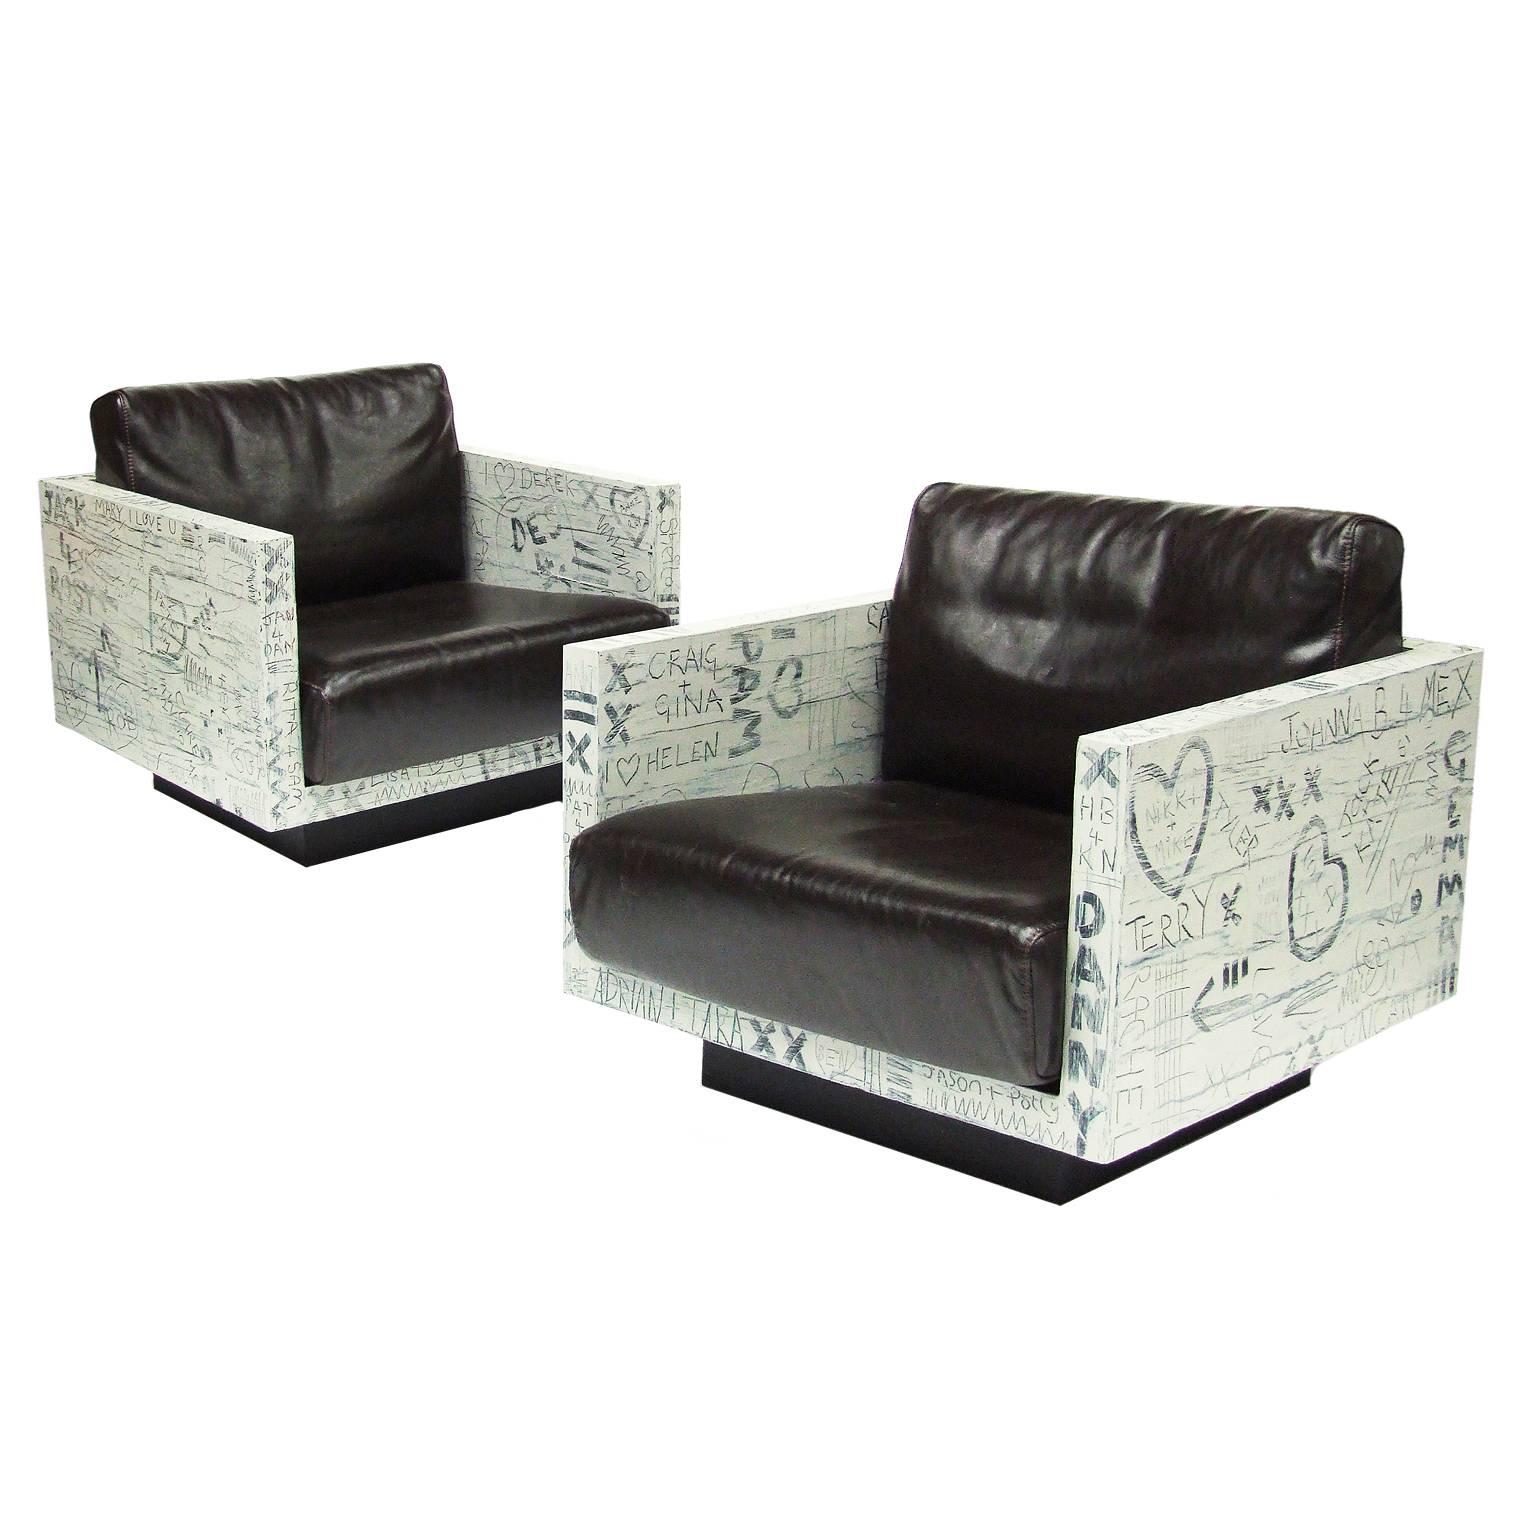 Pair of Sweetheart Graffiti Leather Armchairs Bespoke Art Furniture For Sale